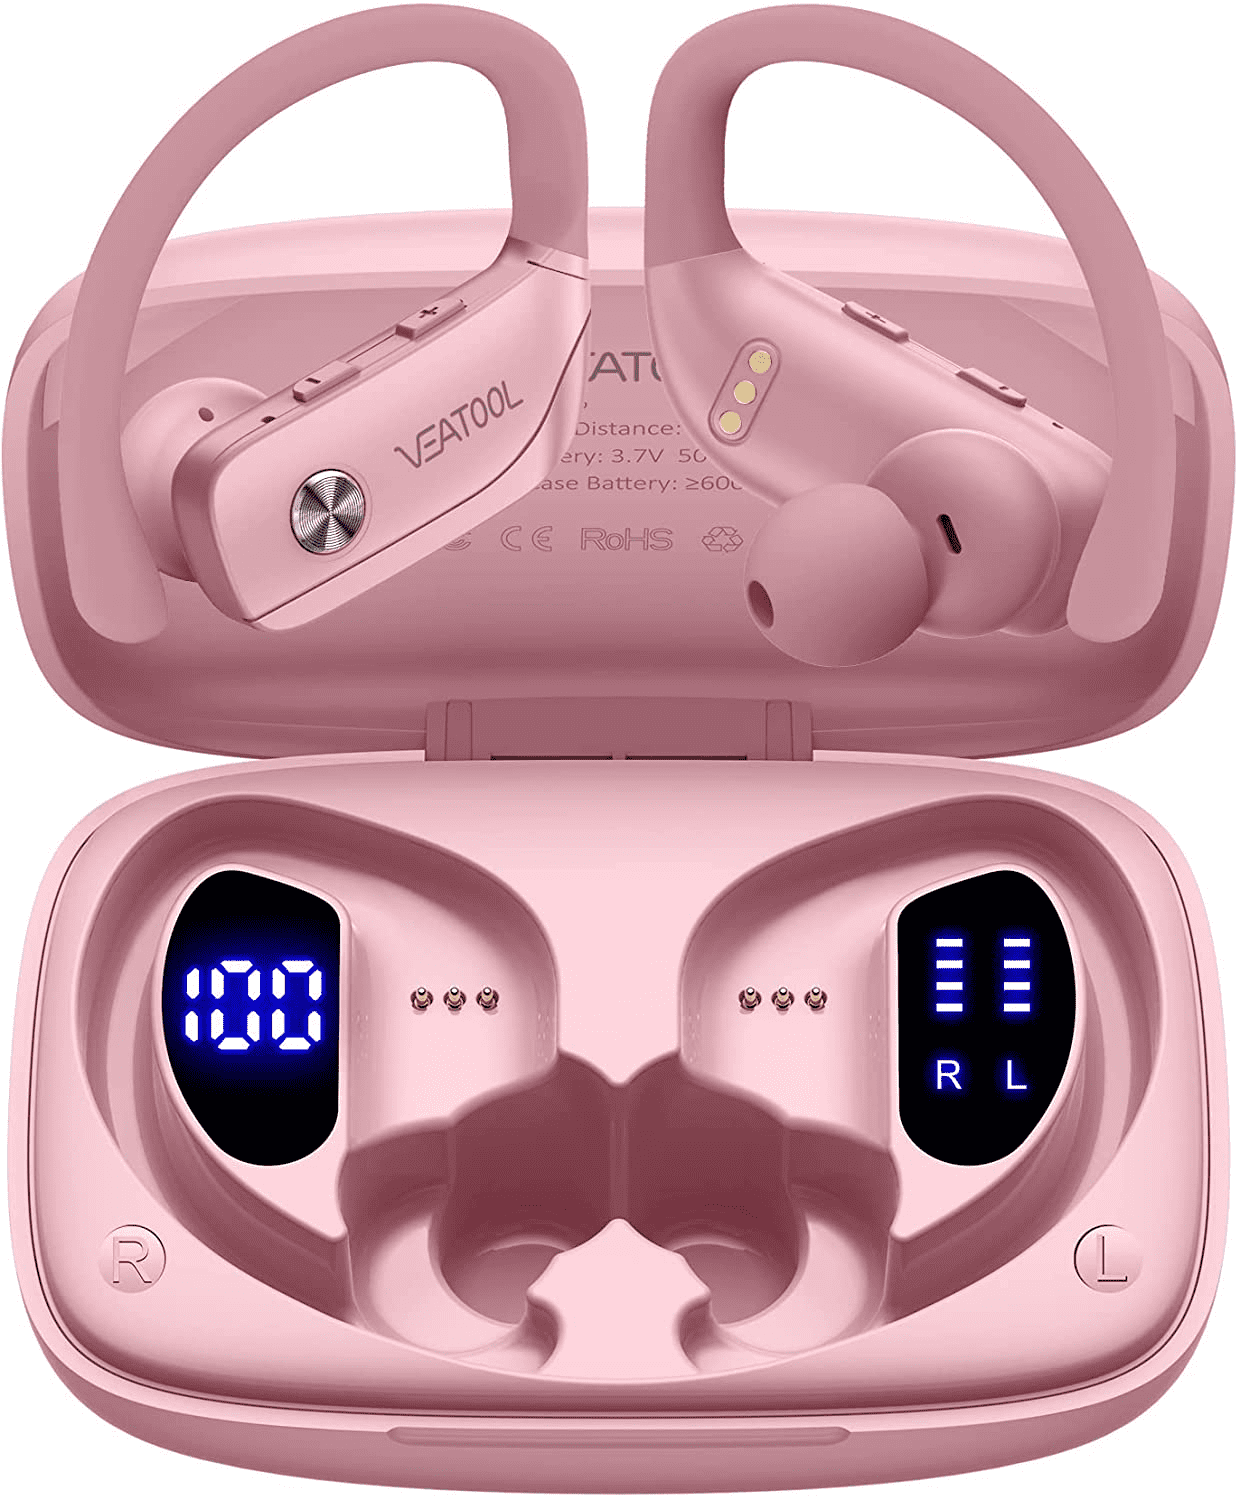 ZIZOCWA for airpods free shipping Wireless Earbuds with Charging Case Wireless Bluetooth Headphones 5.1 In Ear Max Foldable 3D Stereo Sports Subwoofer Computer Headphones Comfortable over Ear Headpho